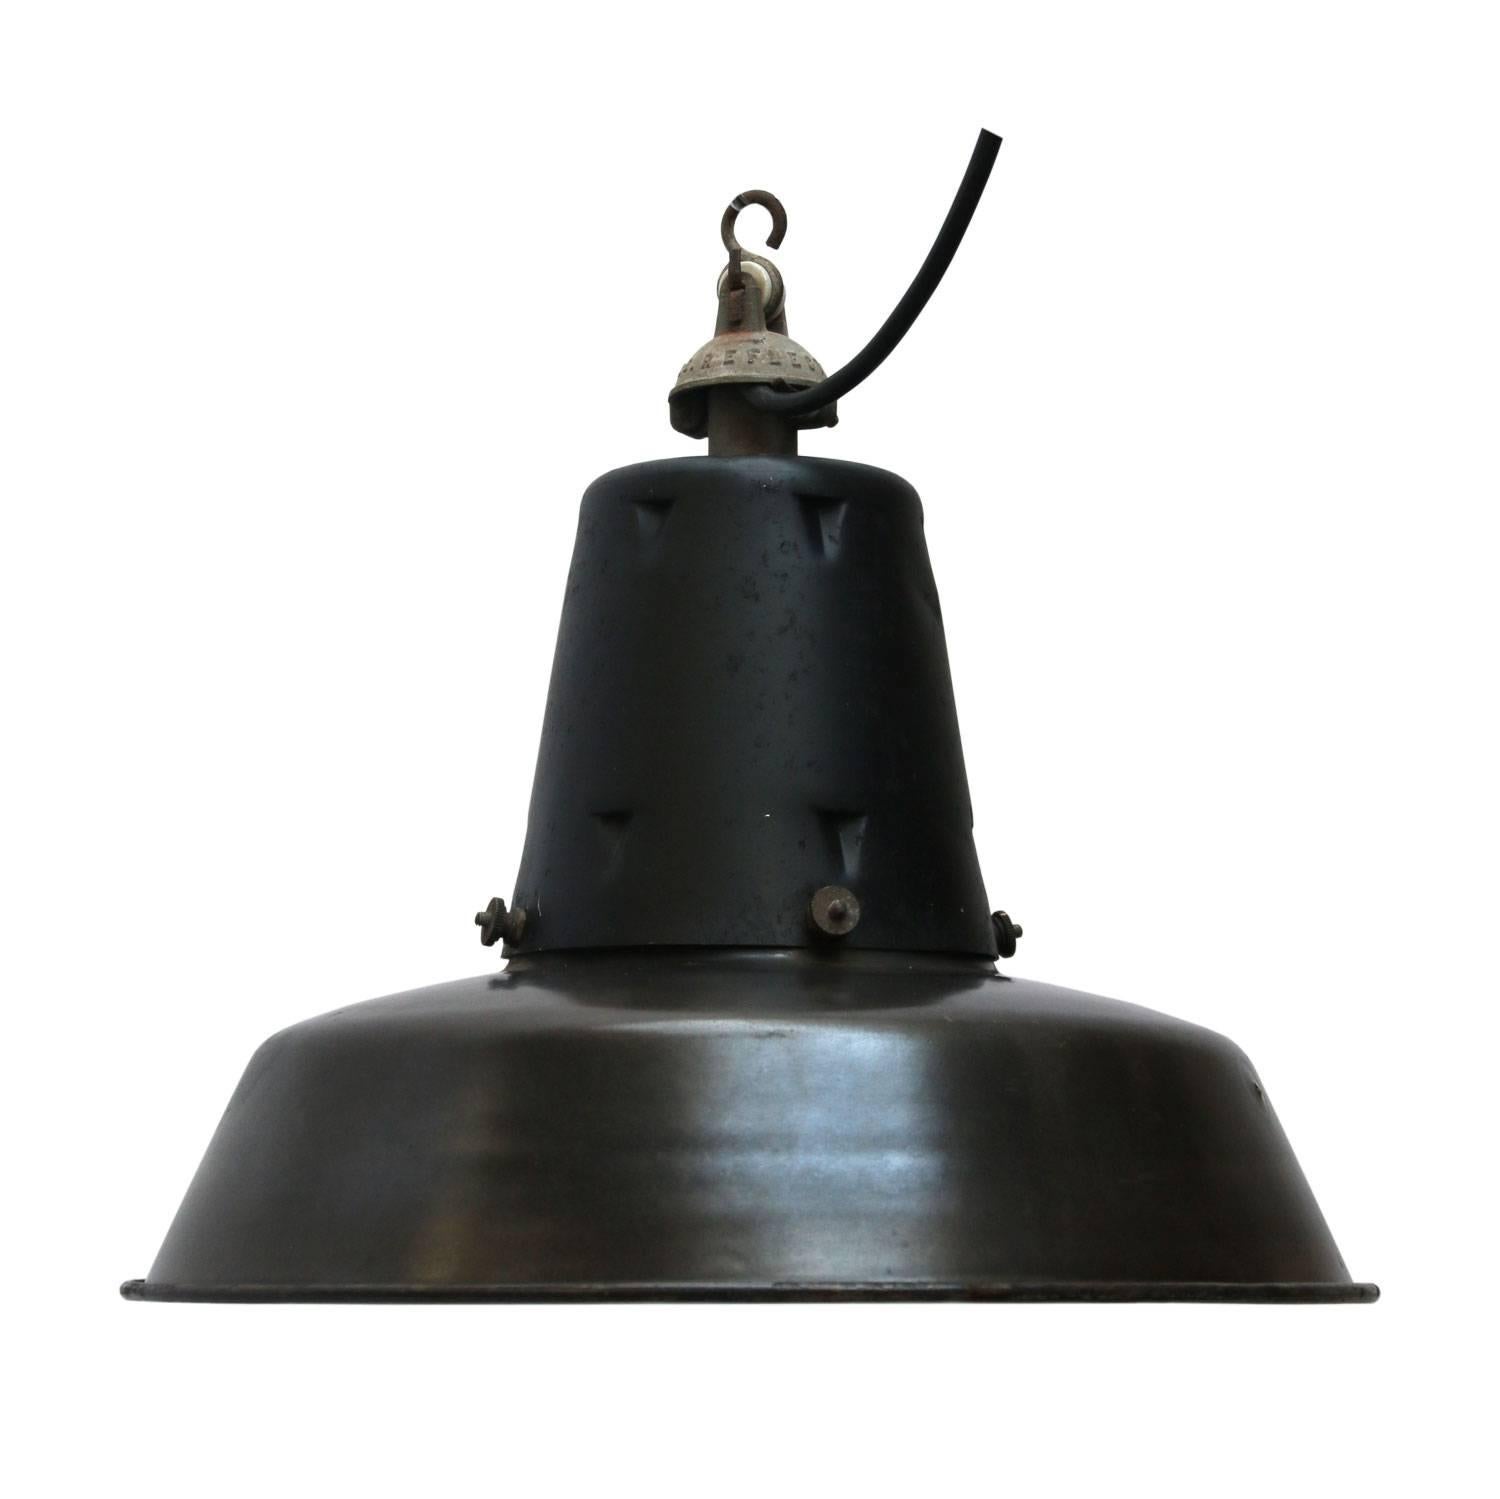 Liart small. French factory light. Black aluminium top with enamel shade.
White inside.

Measures: Weight 1.3 kg / 2.9 lb

All lamps have been made suitable by international standards for incandescent light bulbs, energy-efficient and LED